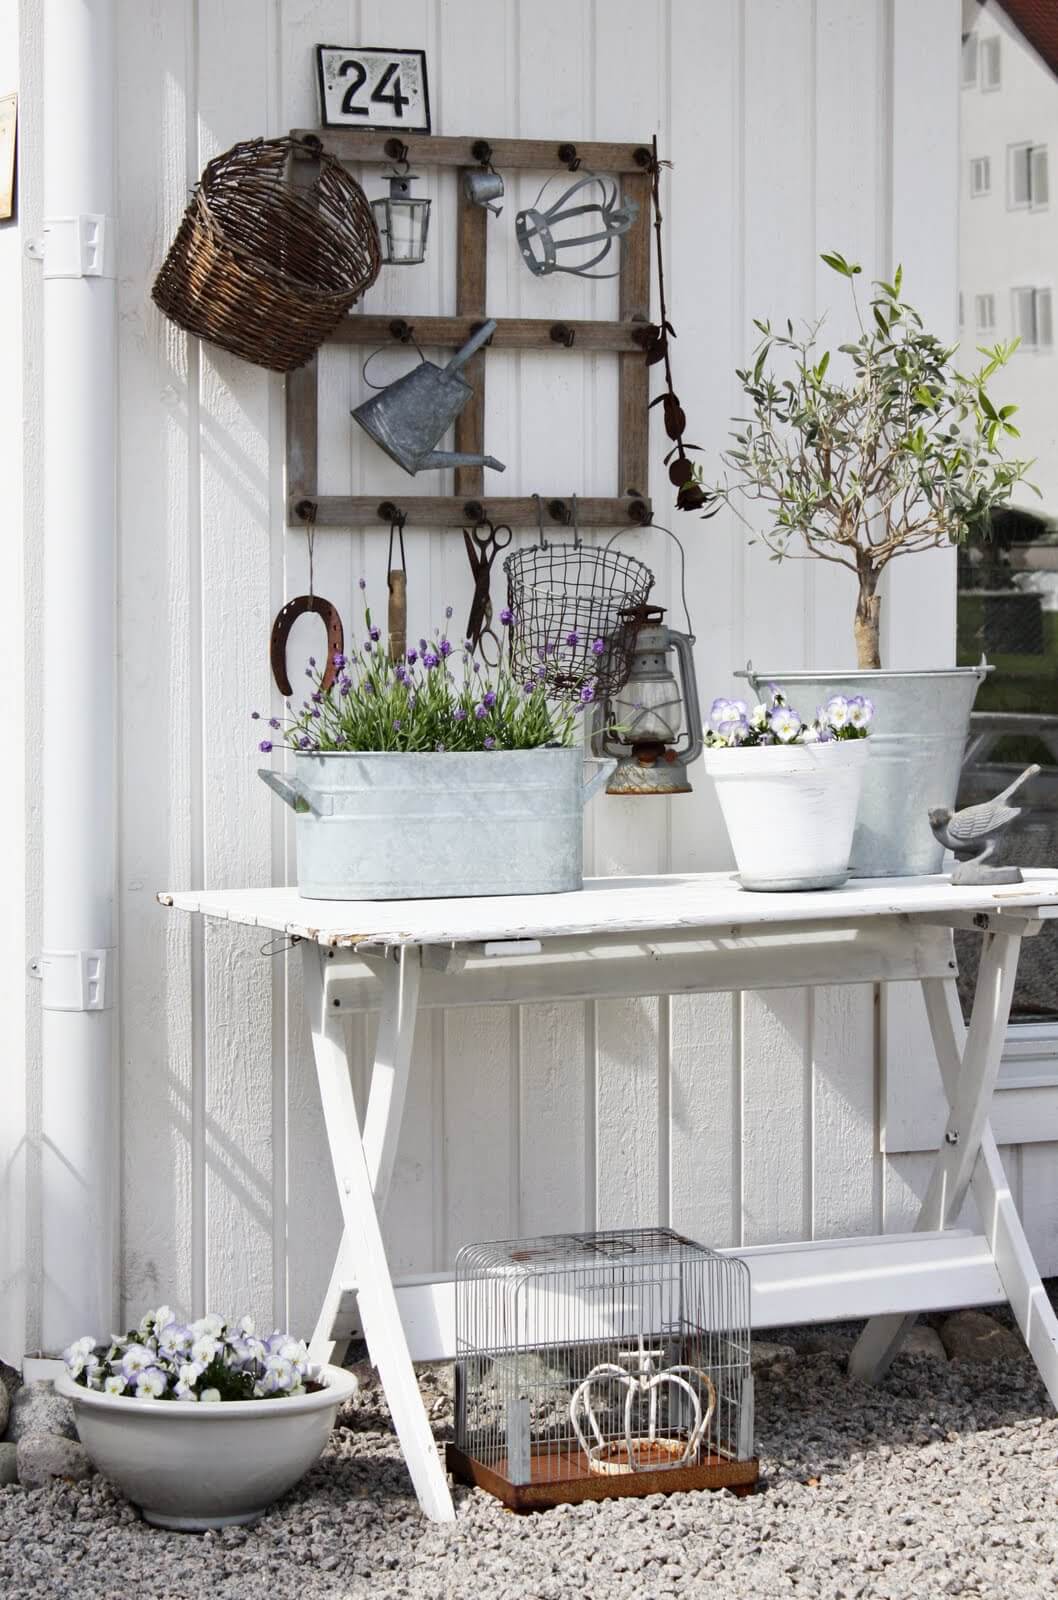 Garden Display Table with Vintage Metal Touches